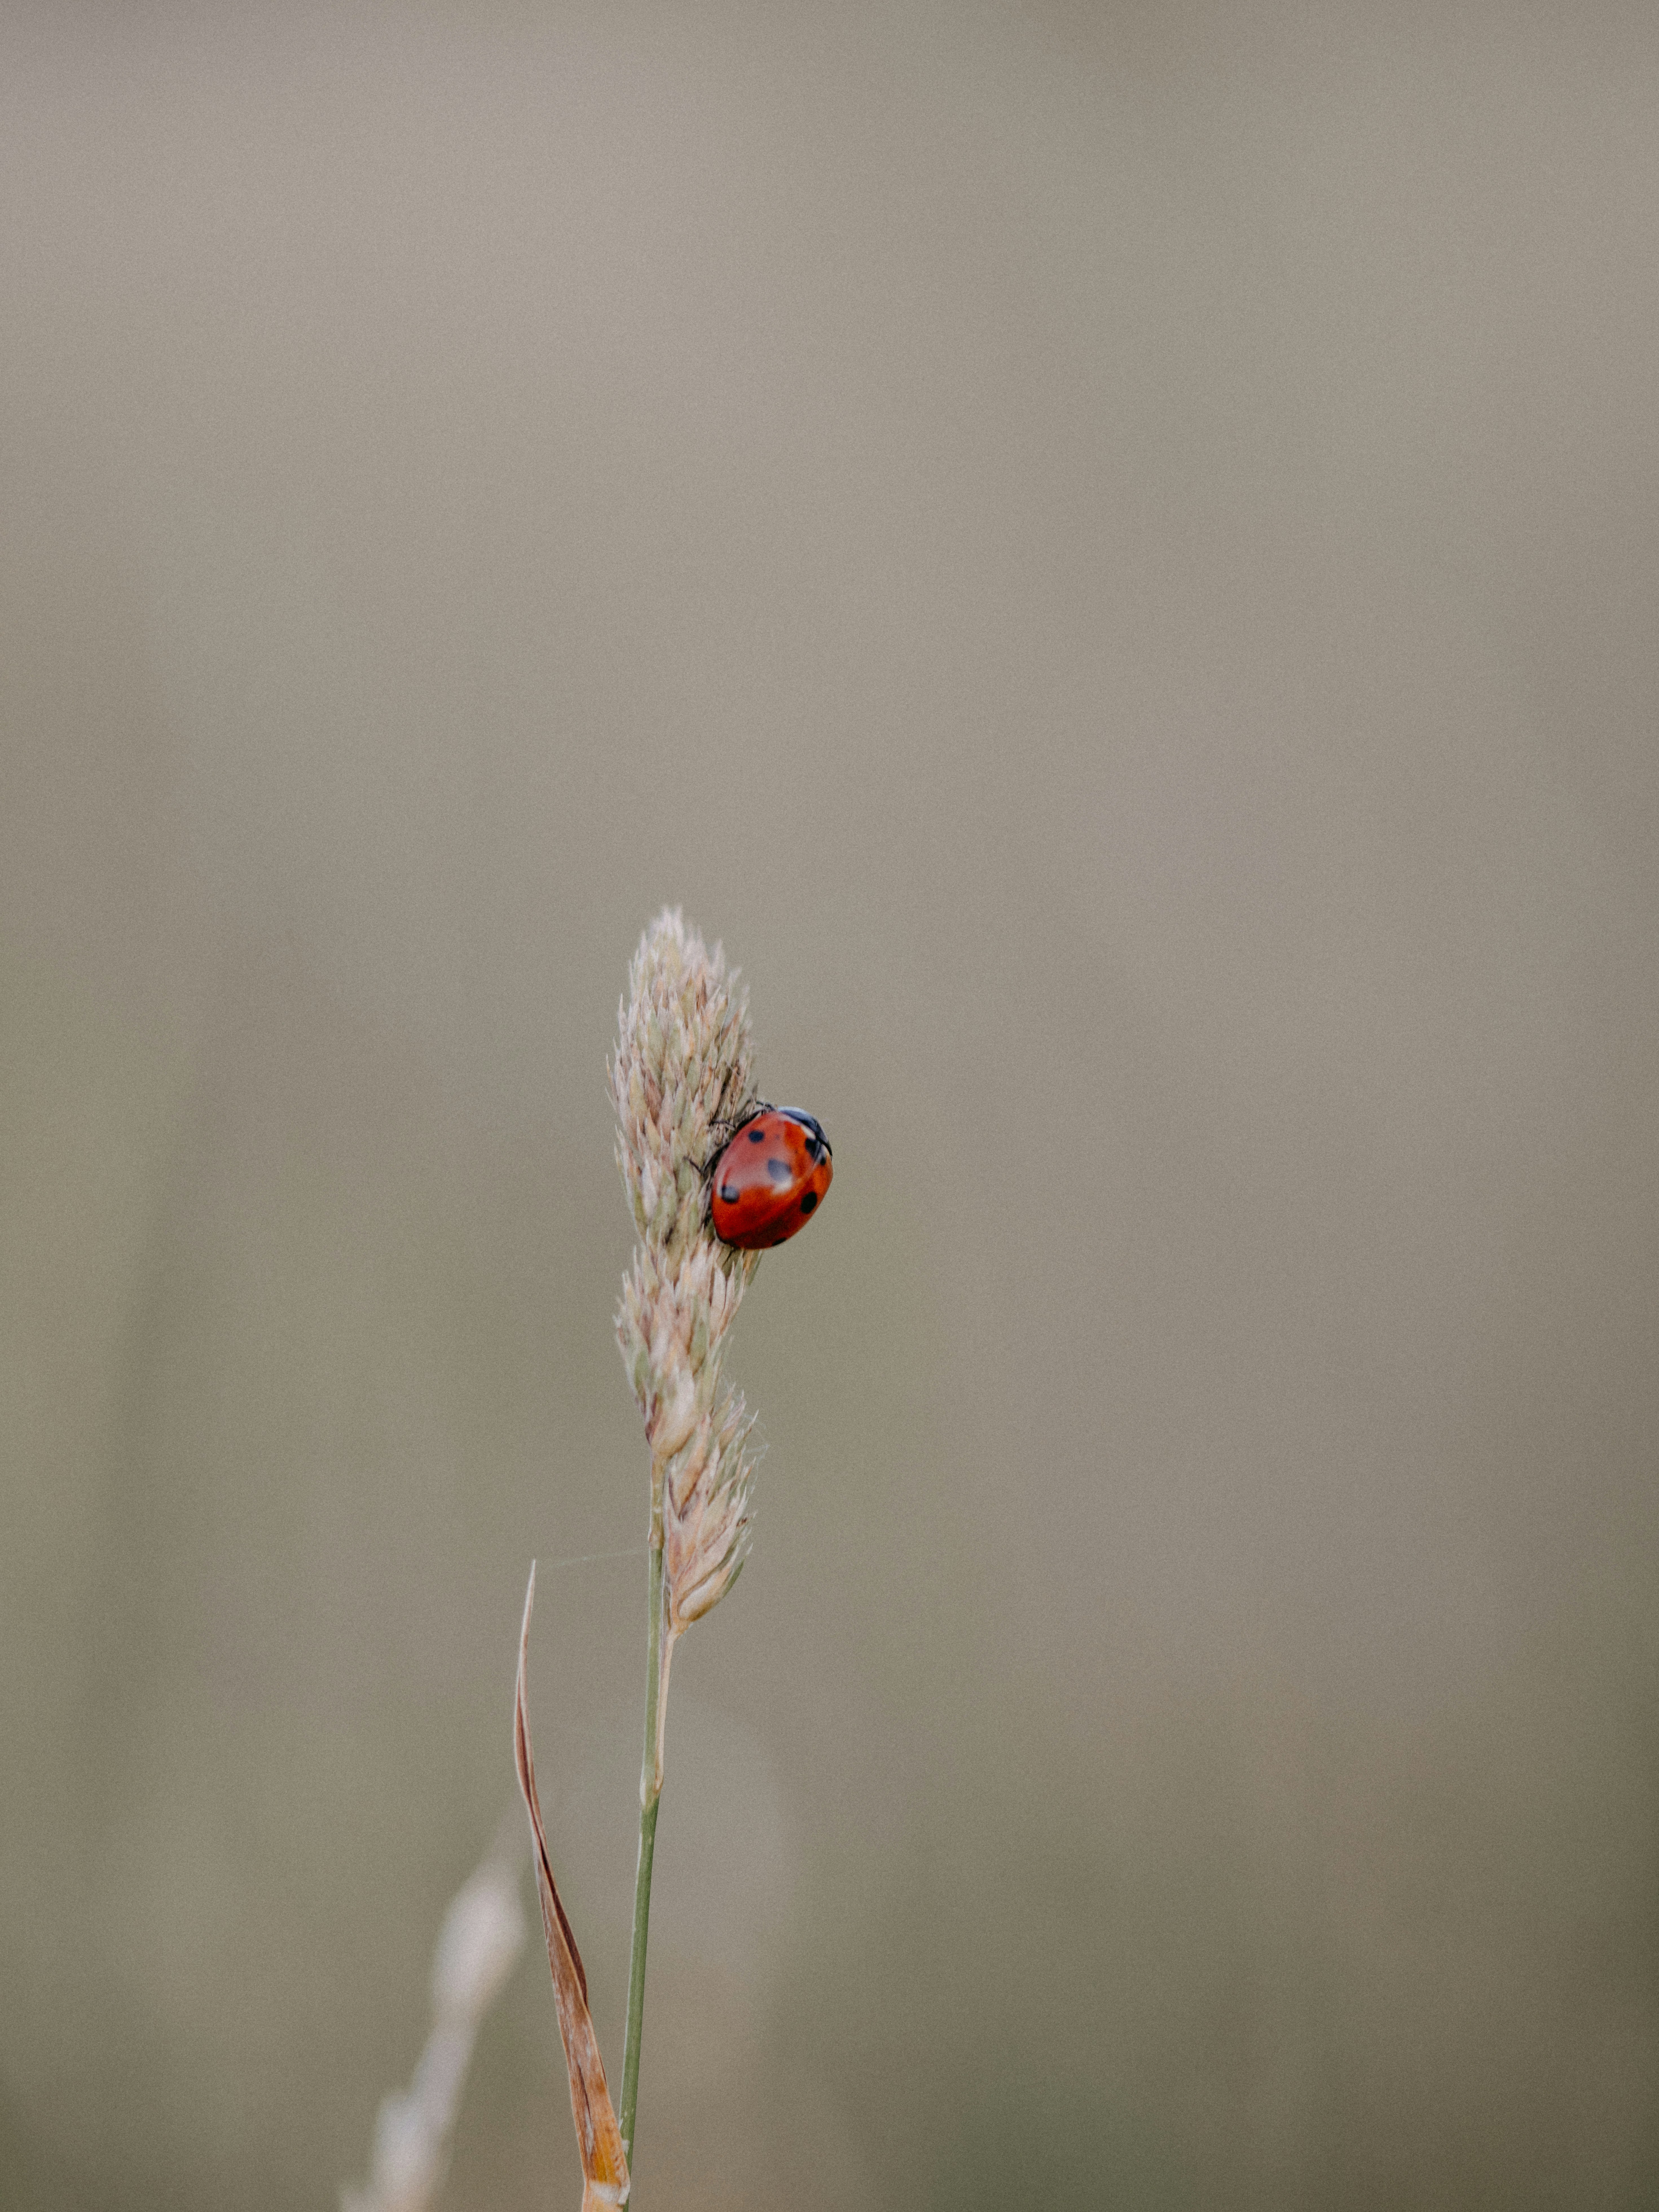 red ladybug perched on brown plant stem in close up photography